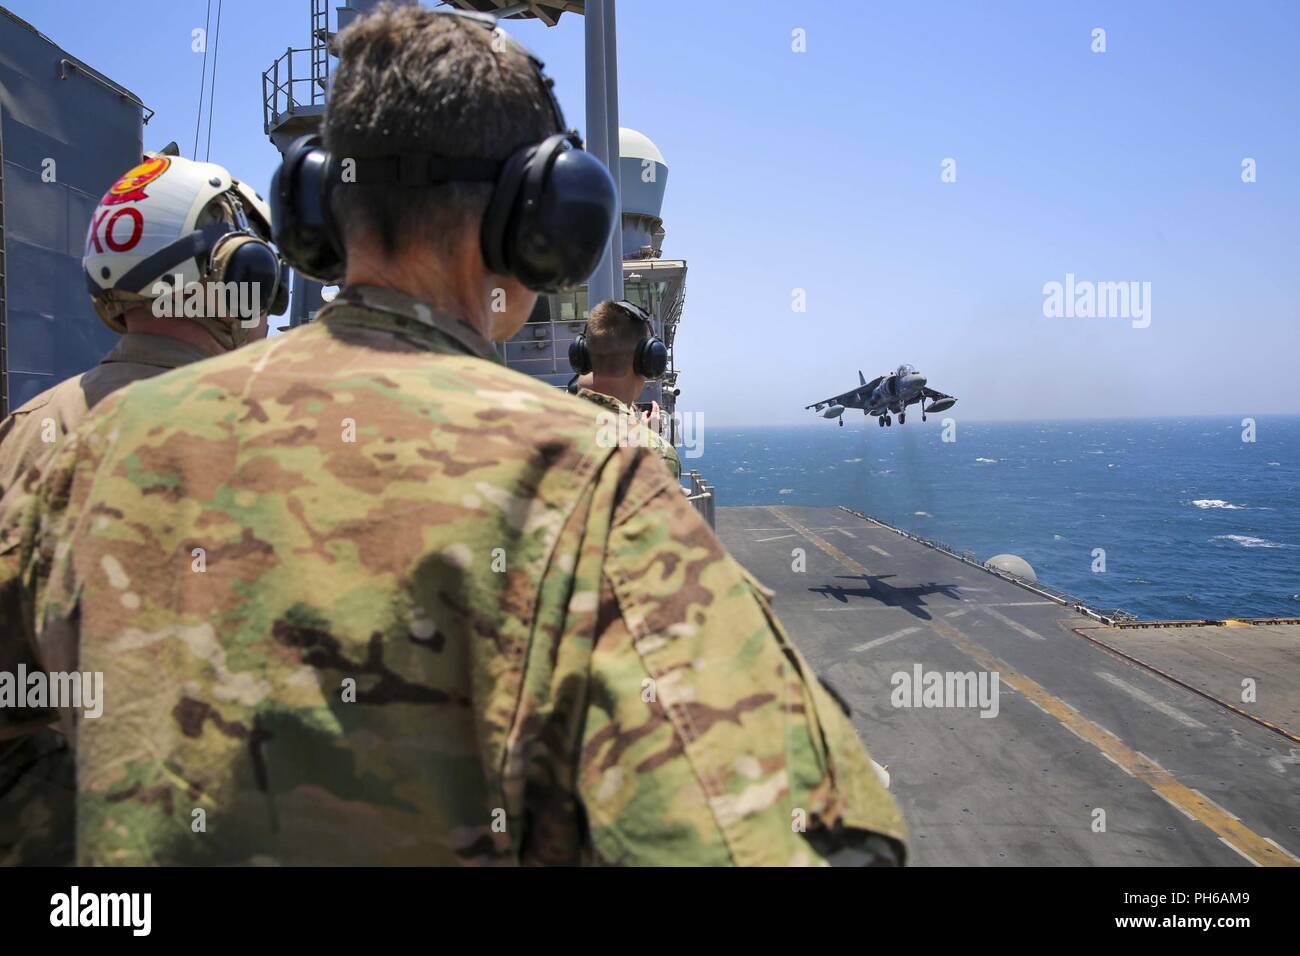 ARABIAN GULF (June 22, 2018) U.S. Army Gen. Joseph Votel, commander, U.S. Central Command, watches as an AV-8B Harrier lands aboard the Wasp-class amphibious assault ship USS Iwo Jima (LHD 7), June 22, 2018. Votel, Vice Adm. Scott Stearney, commander, U.S. Naval Forces Central Command, and other distinguished visitors took a tour of Iwo Jima and spoke with crew members and Marines with the 26th Marine Expeditionary Unit, who are currently deployed to the U.S. 5th Fleet of operations in support of maritime security operations to reassure allies and partners and preserve the freedom of navigatio Stock Photo